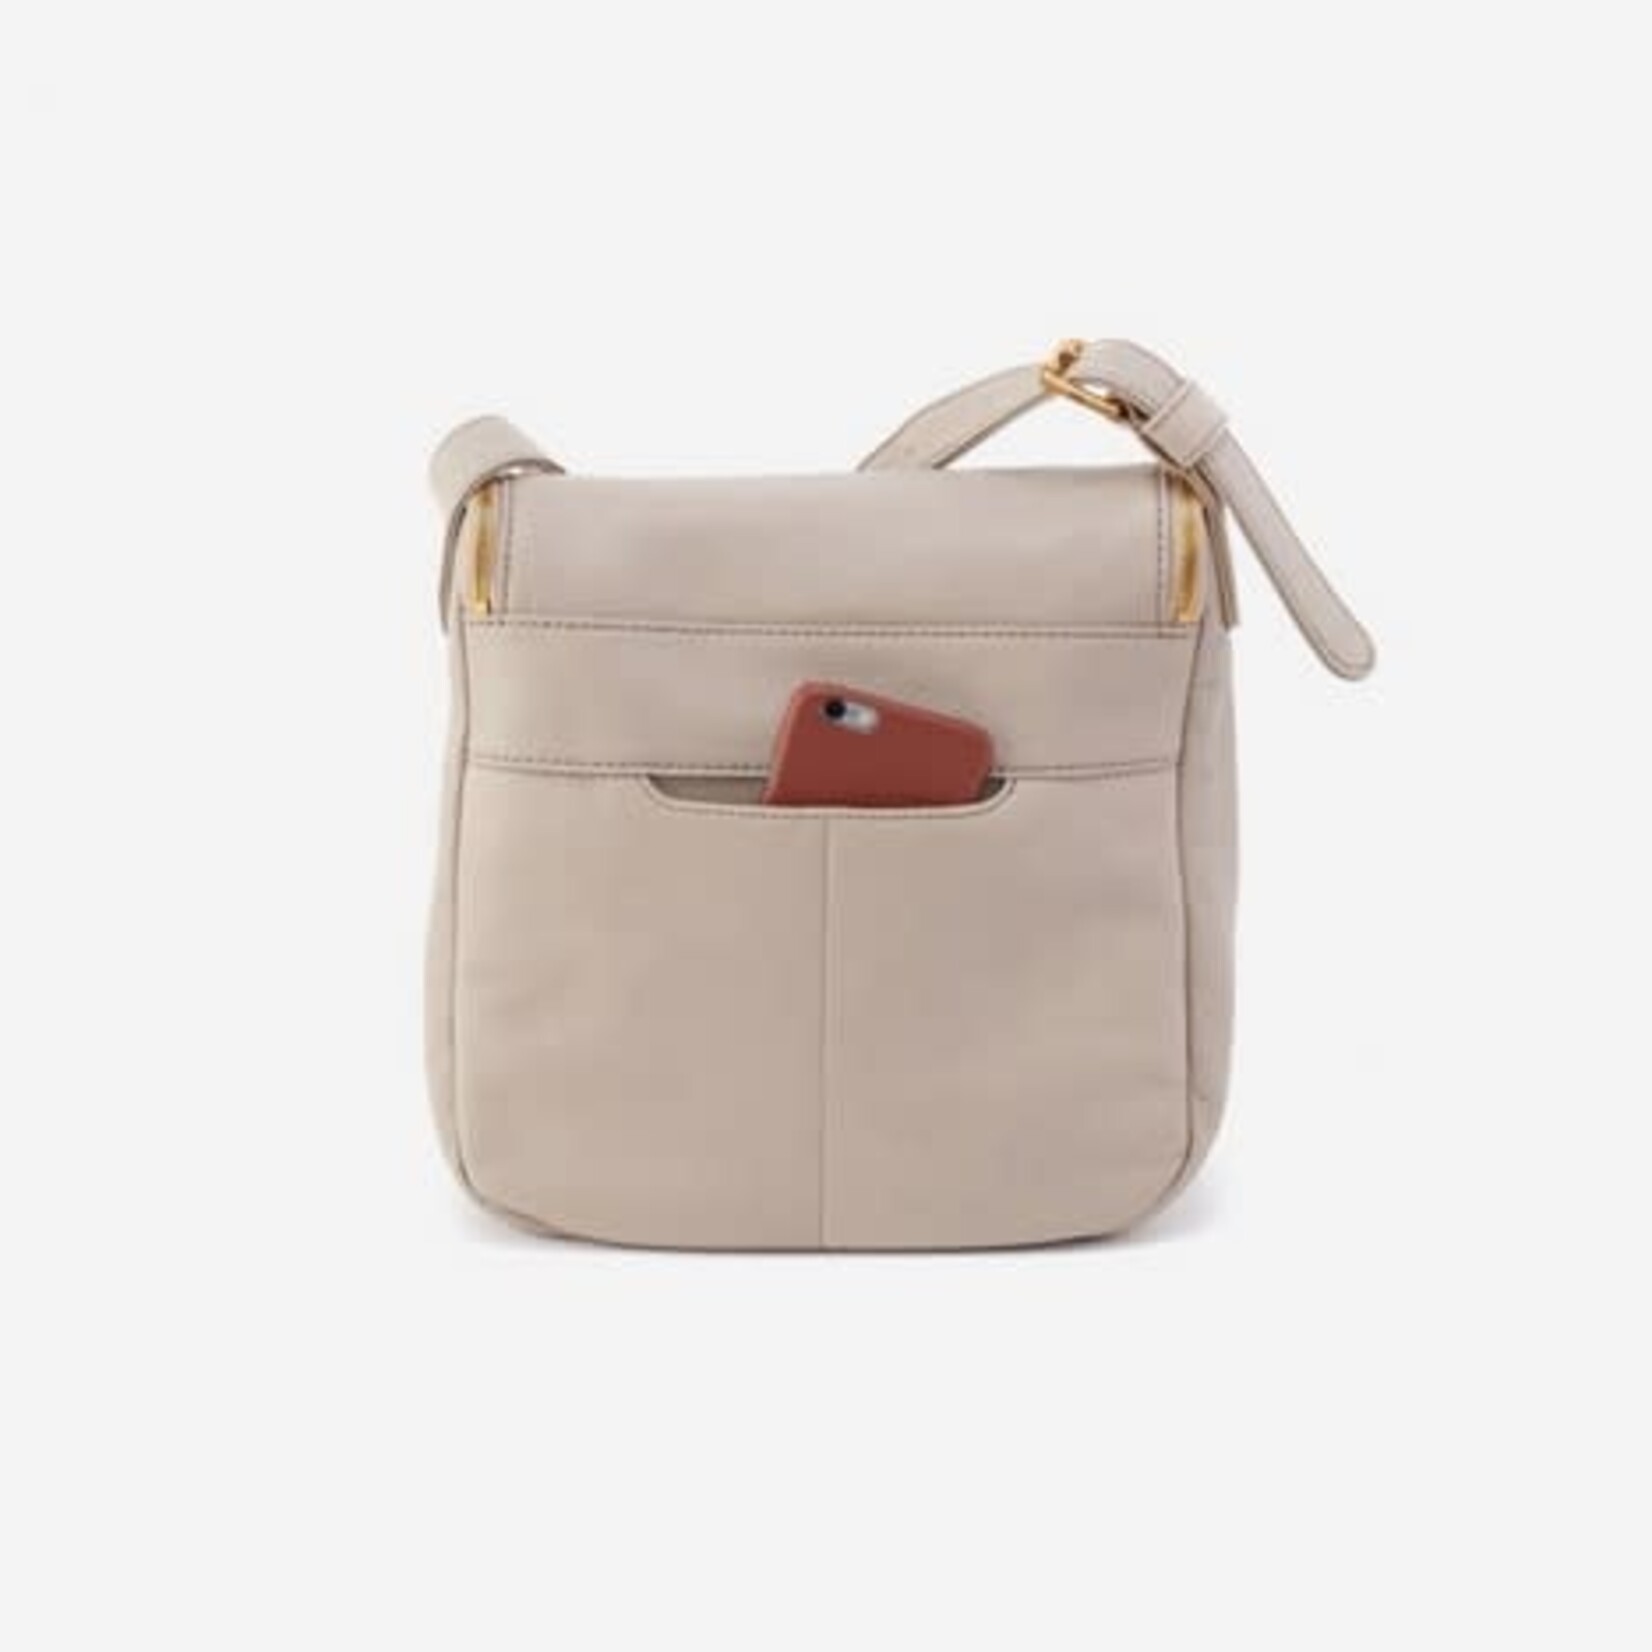 HOBO Fern North/South Crossbody - Pebbled Leather in Taupe